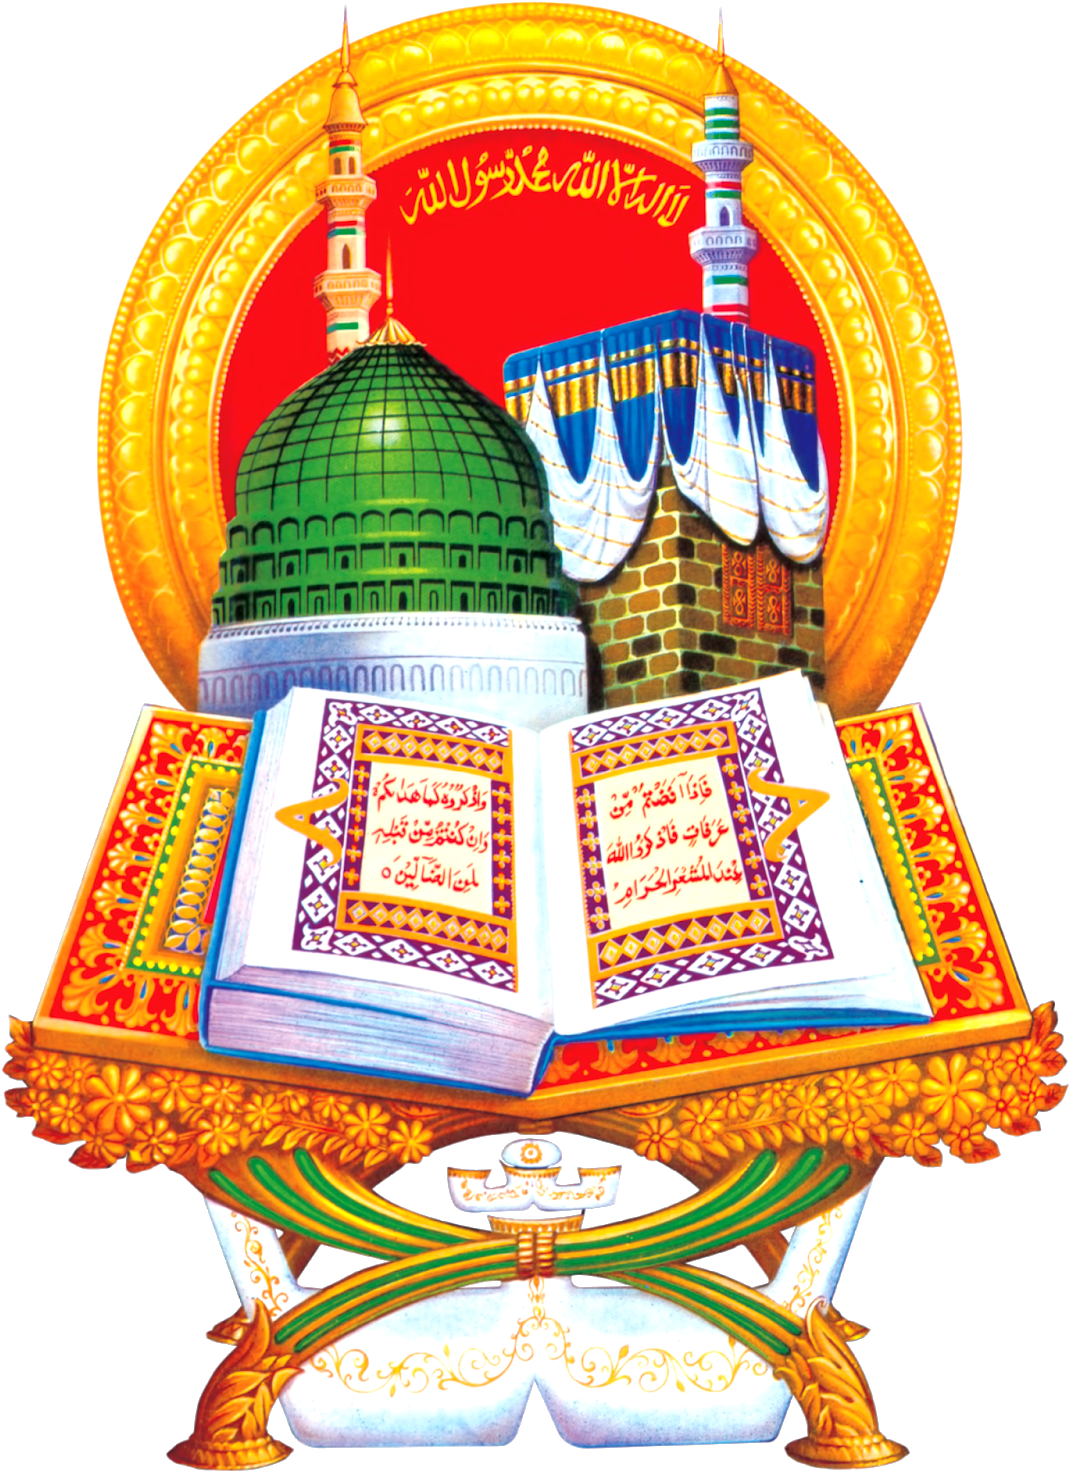 A Colorful Picture Of A Book And A Dome